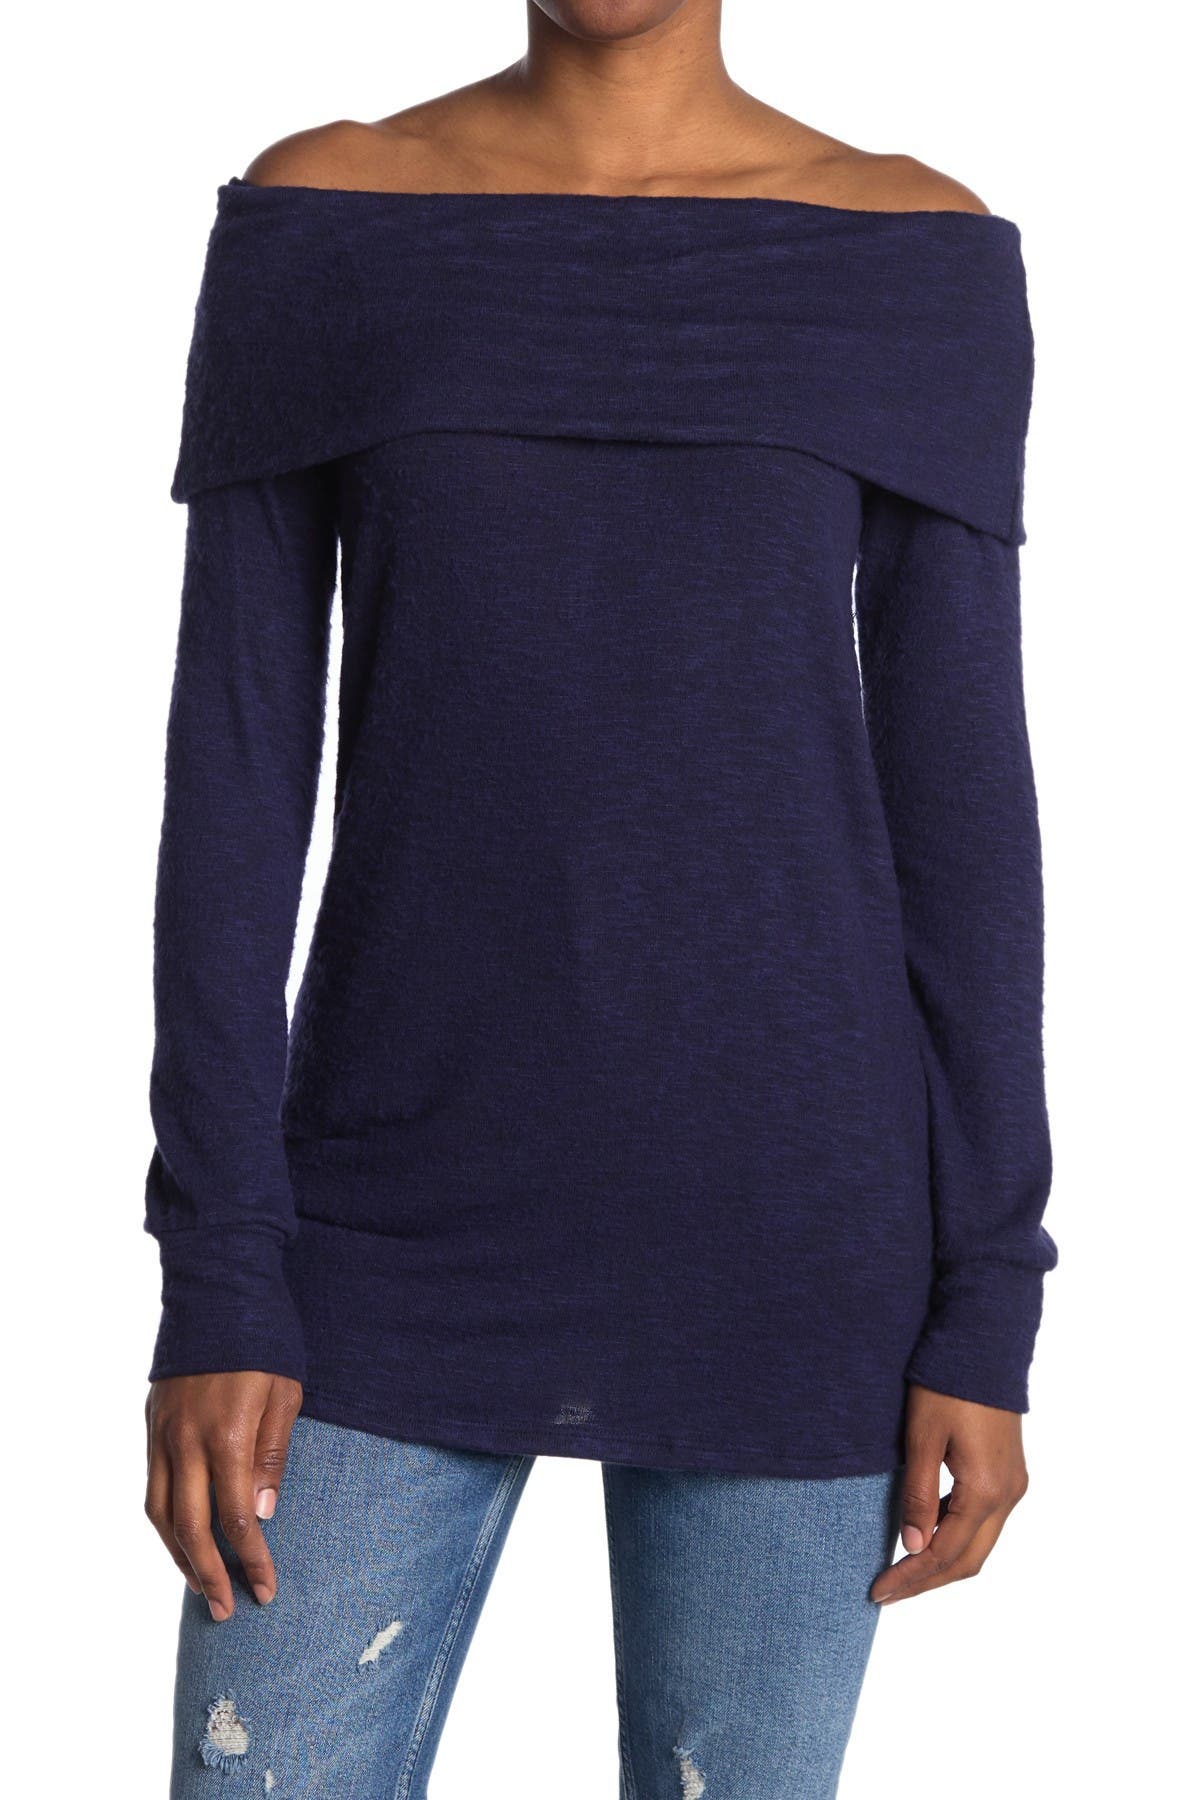 Go Couture Foldover Off-the-shoulder Tunic Sweater In Navy8